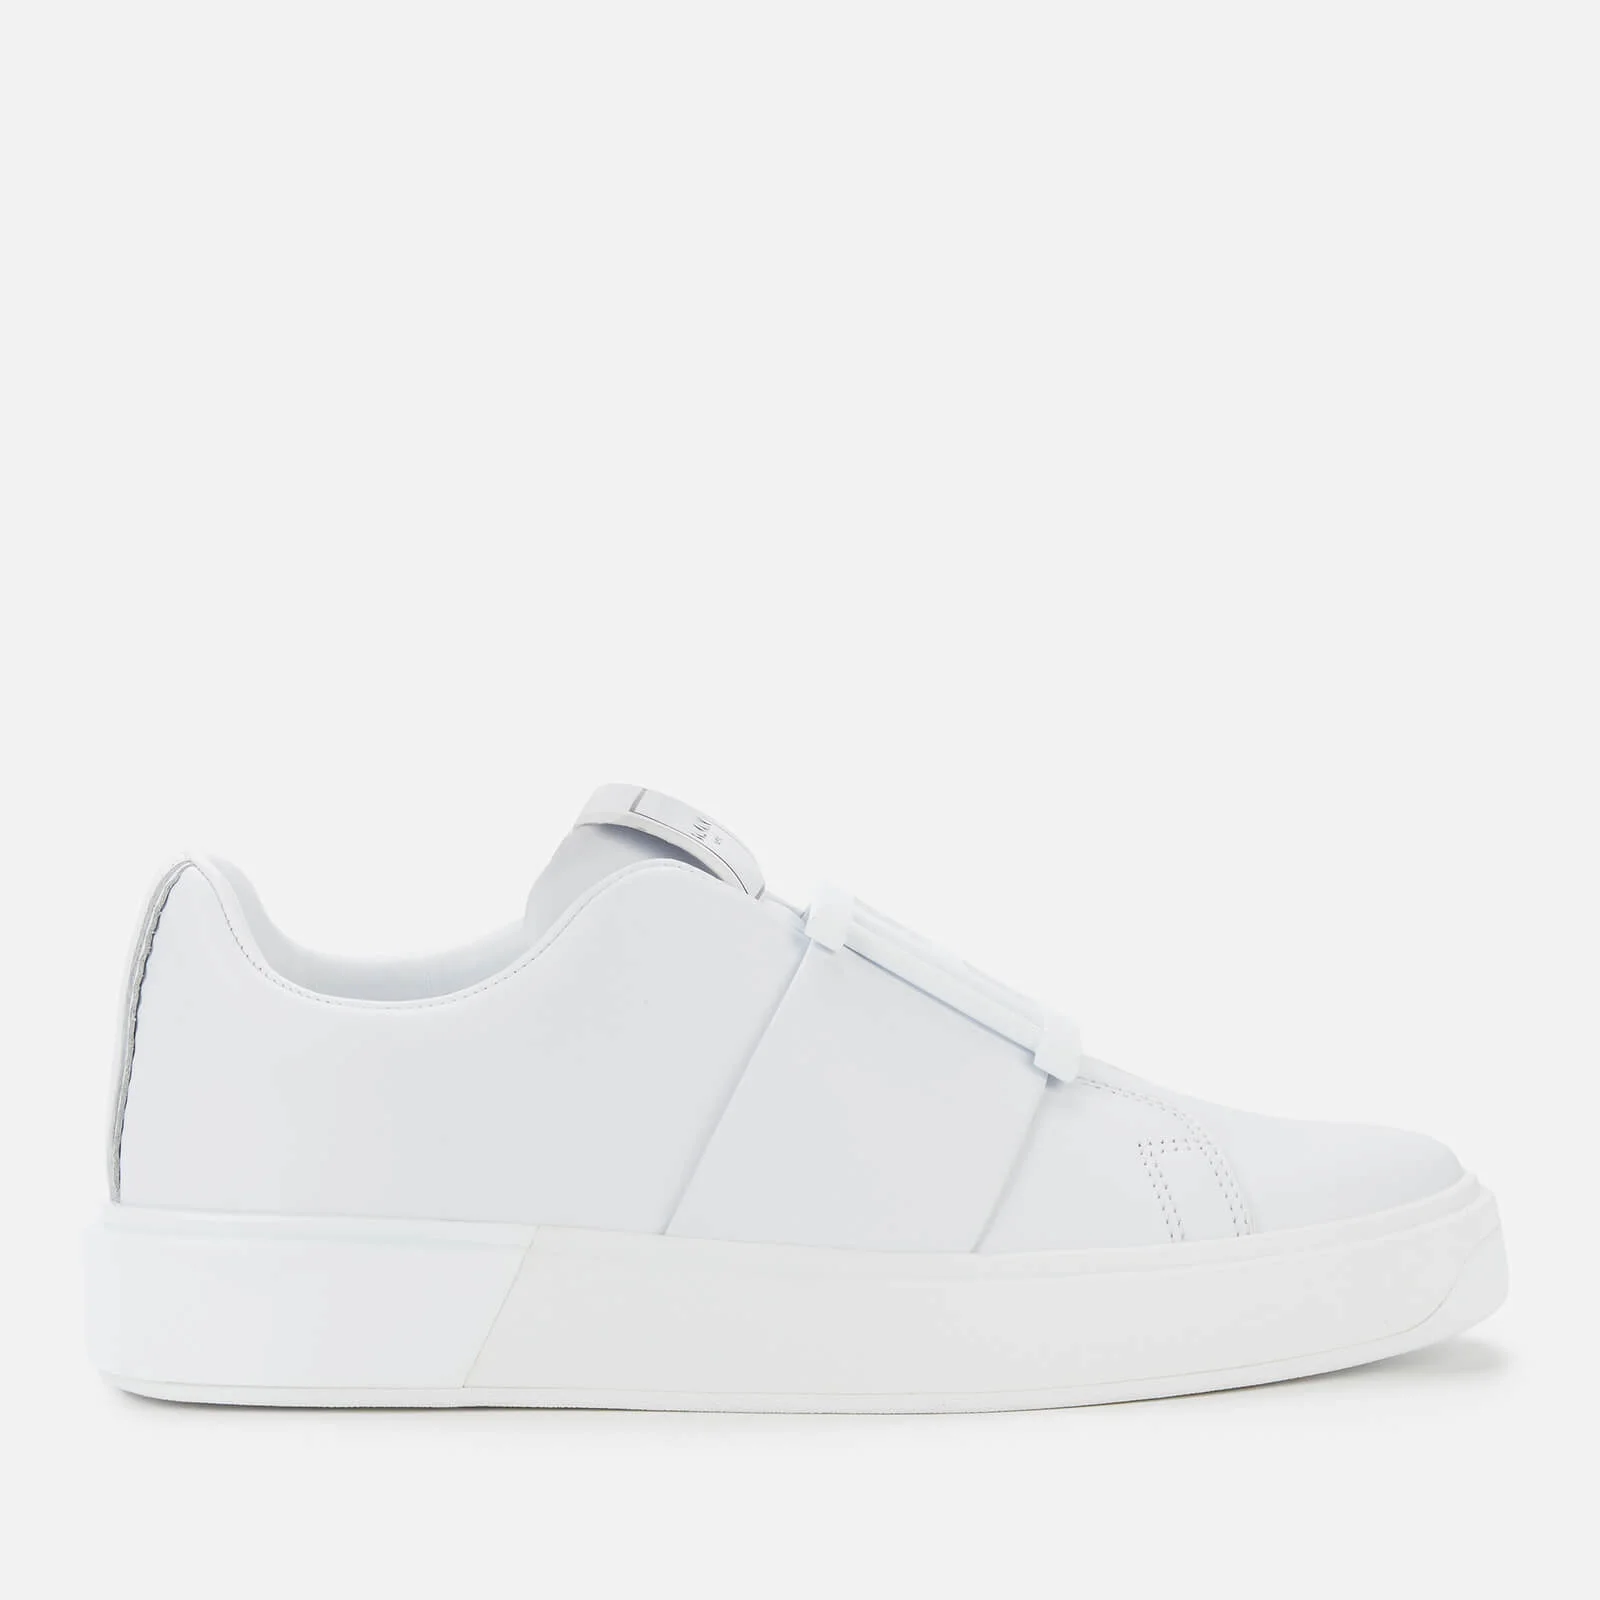 Balmain Women's Leather Low Top Trainers - White Image 1